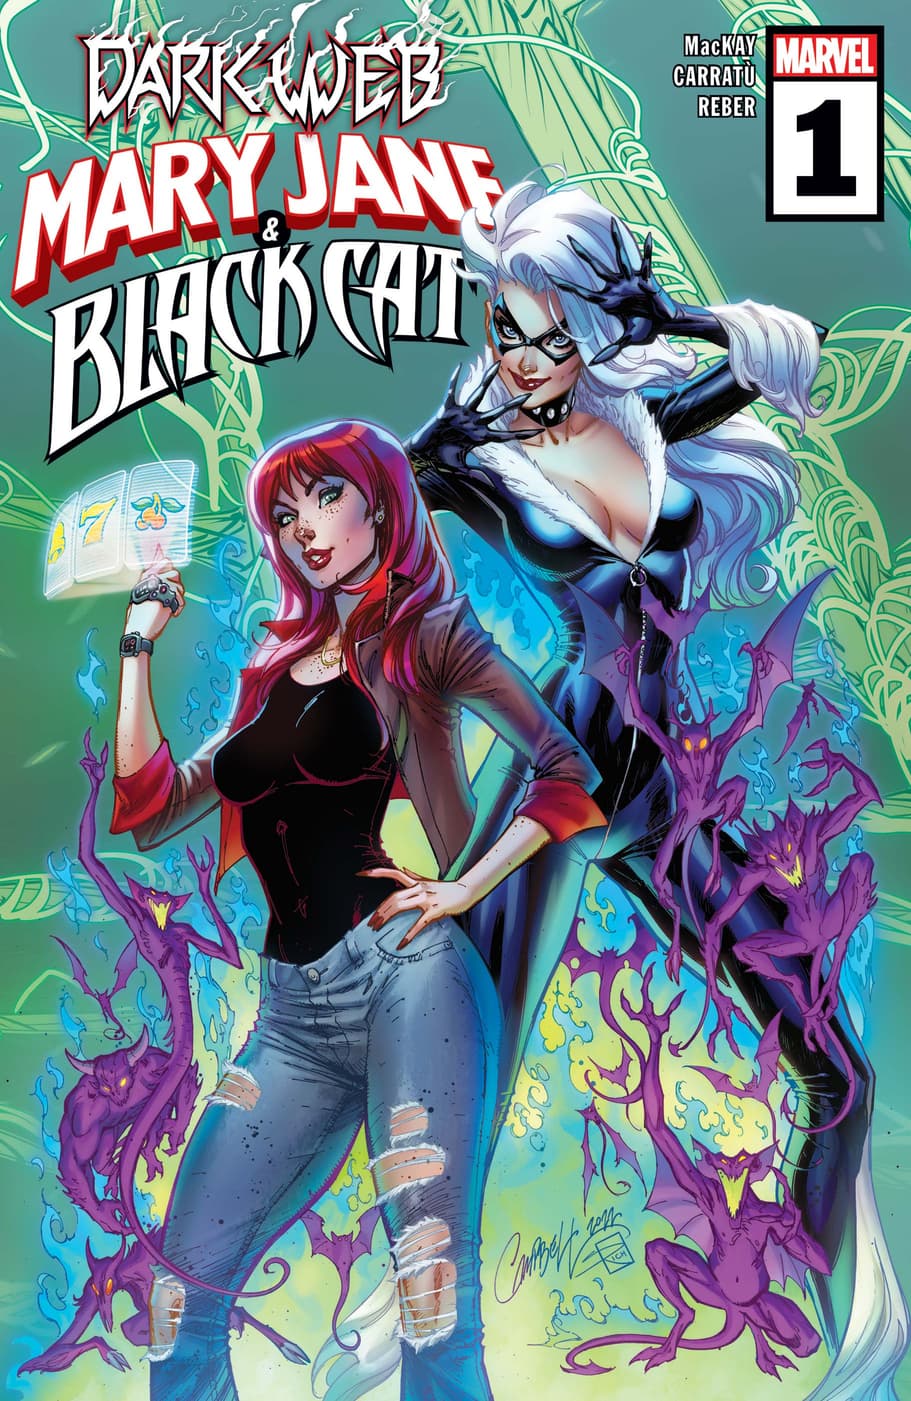 MARY JANE & BLACK CAT (2022) #1 cover by J. Scott Campbell